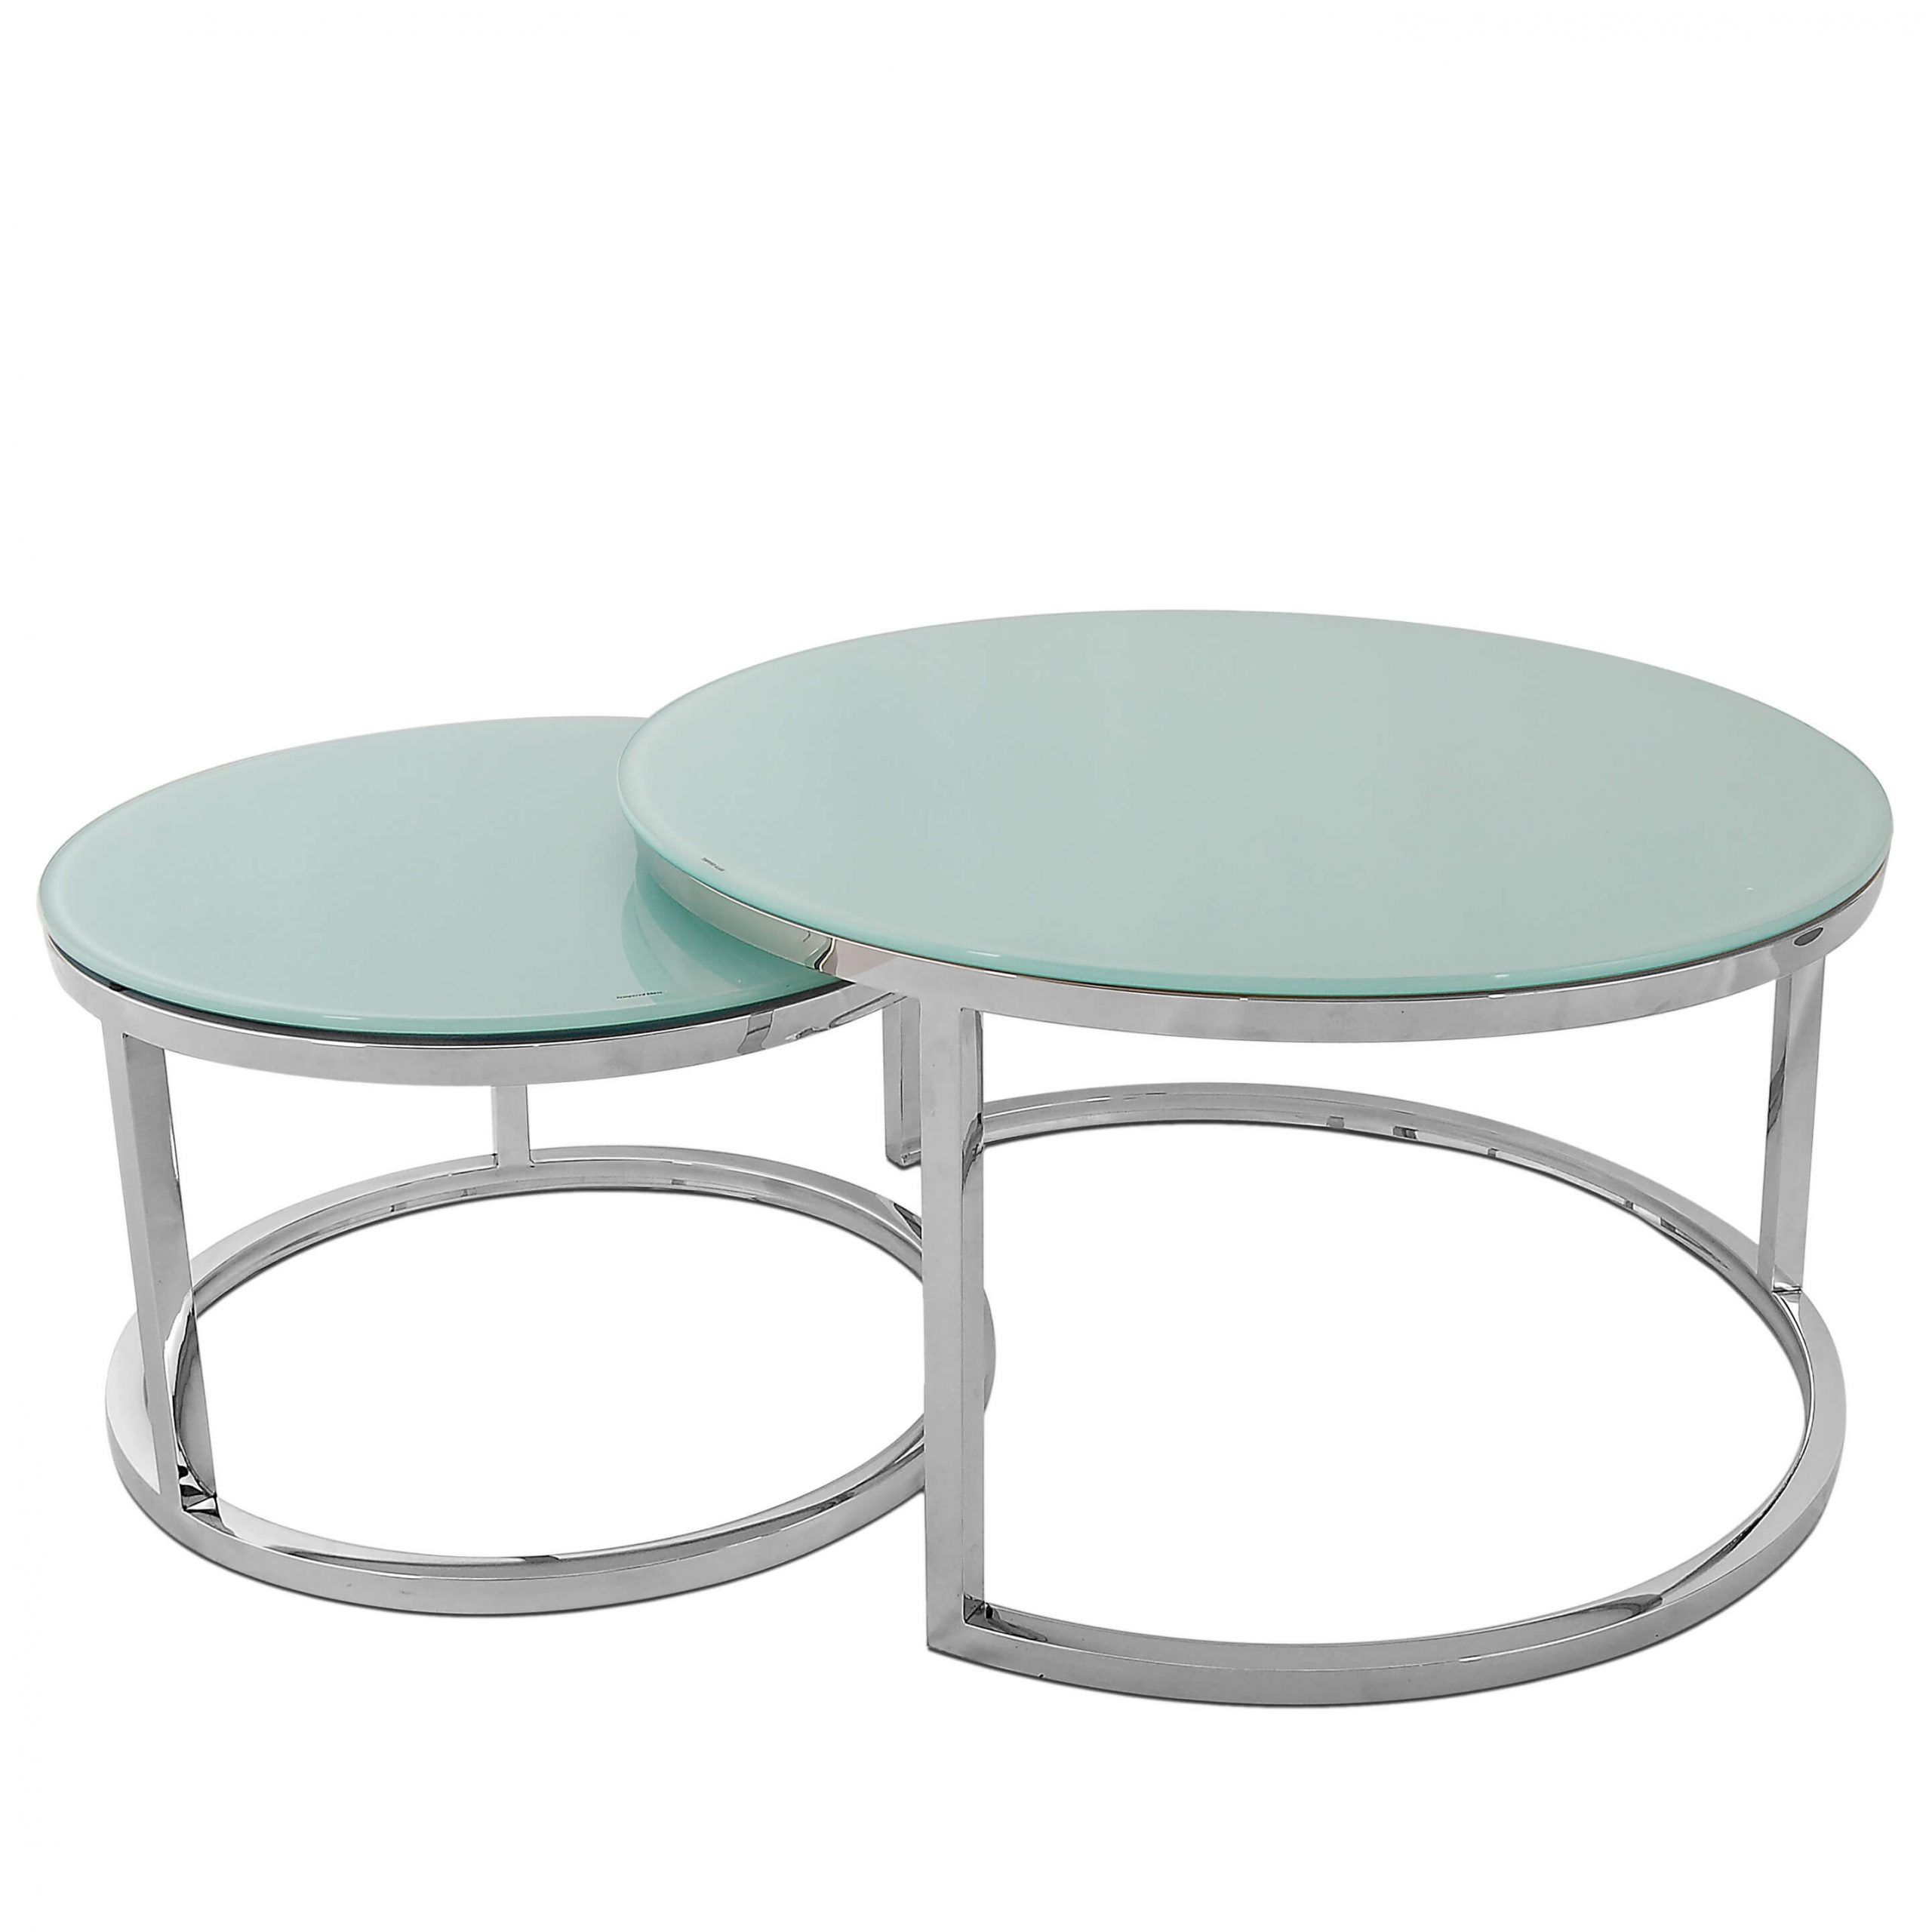 Eclipse A Set Of Two Stainless Steel Coffee Tables | Arte Dal Mondo In Glass Topped Coffee Tables (View 7 of 20)